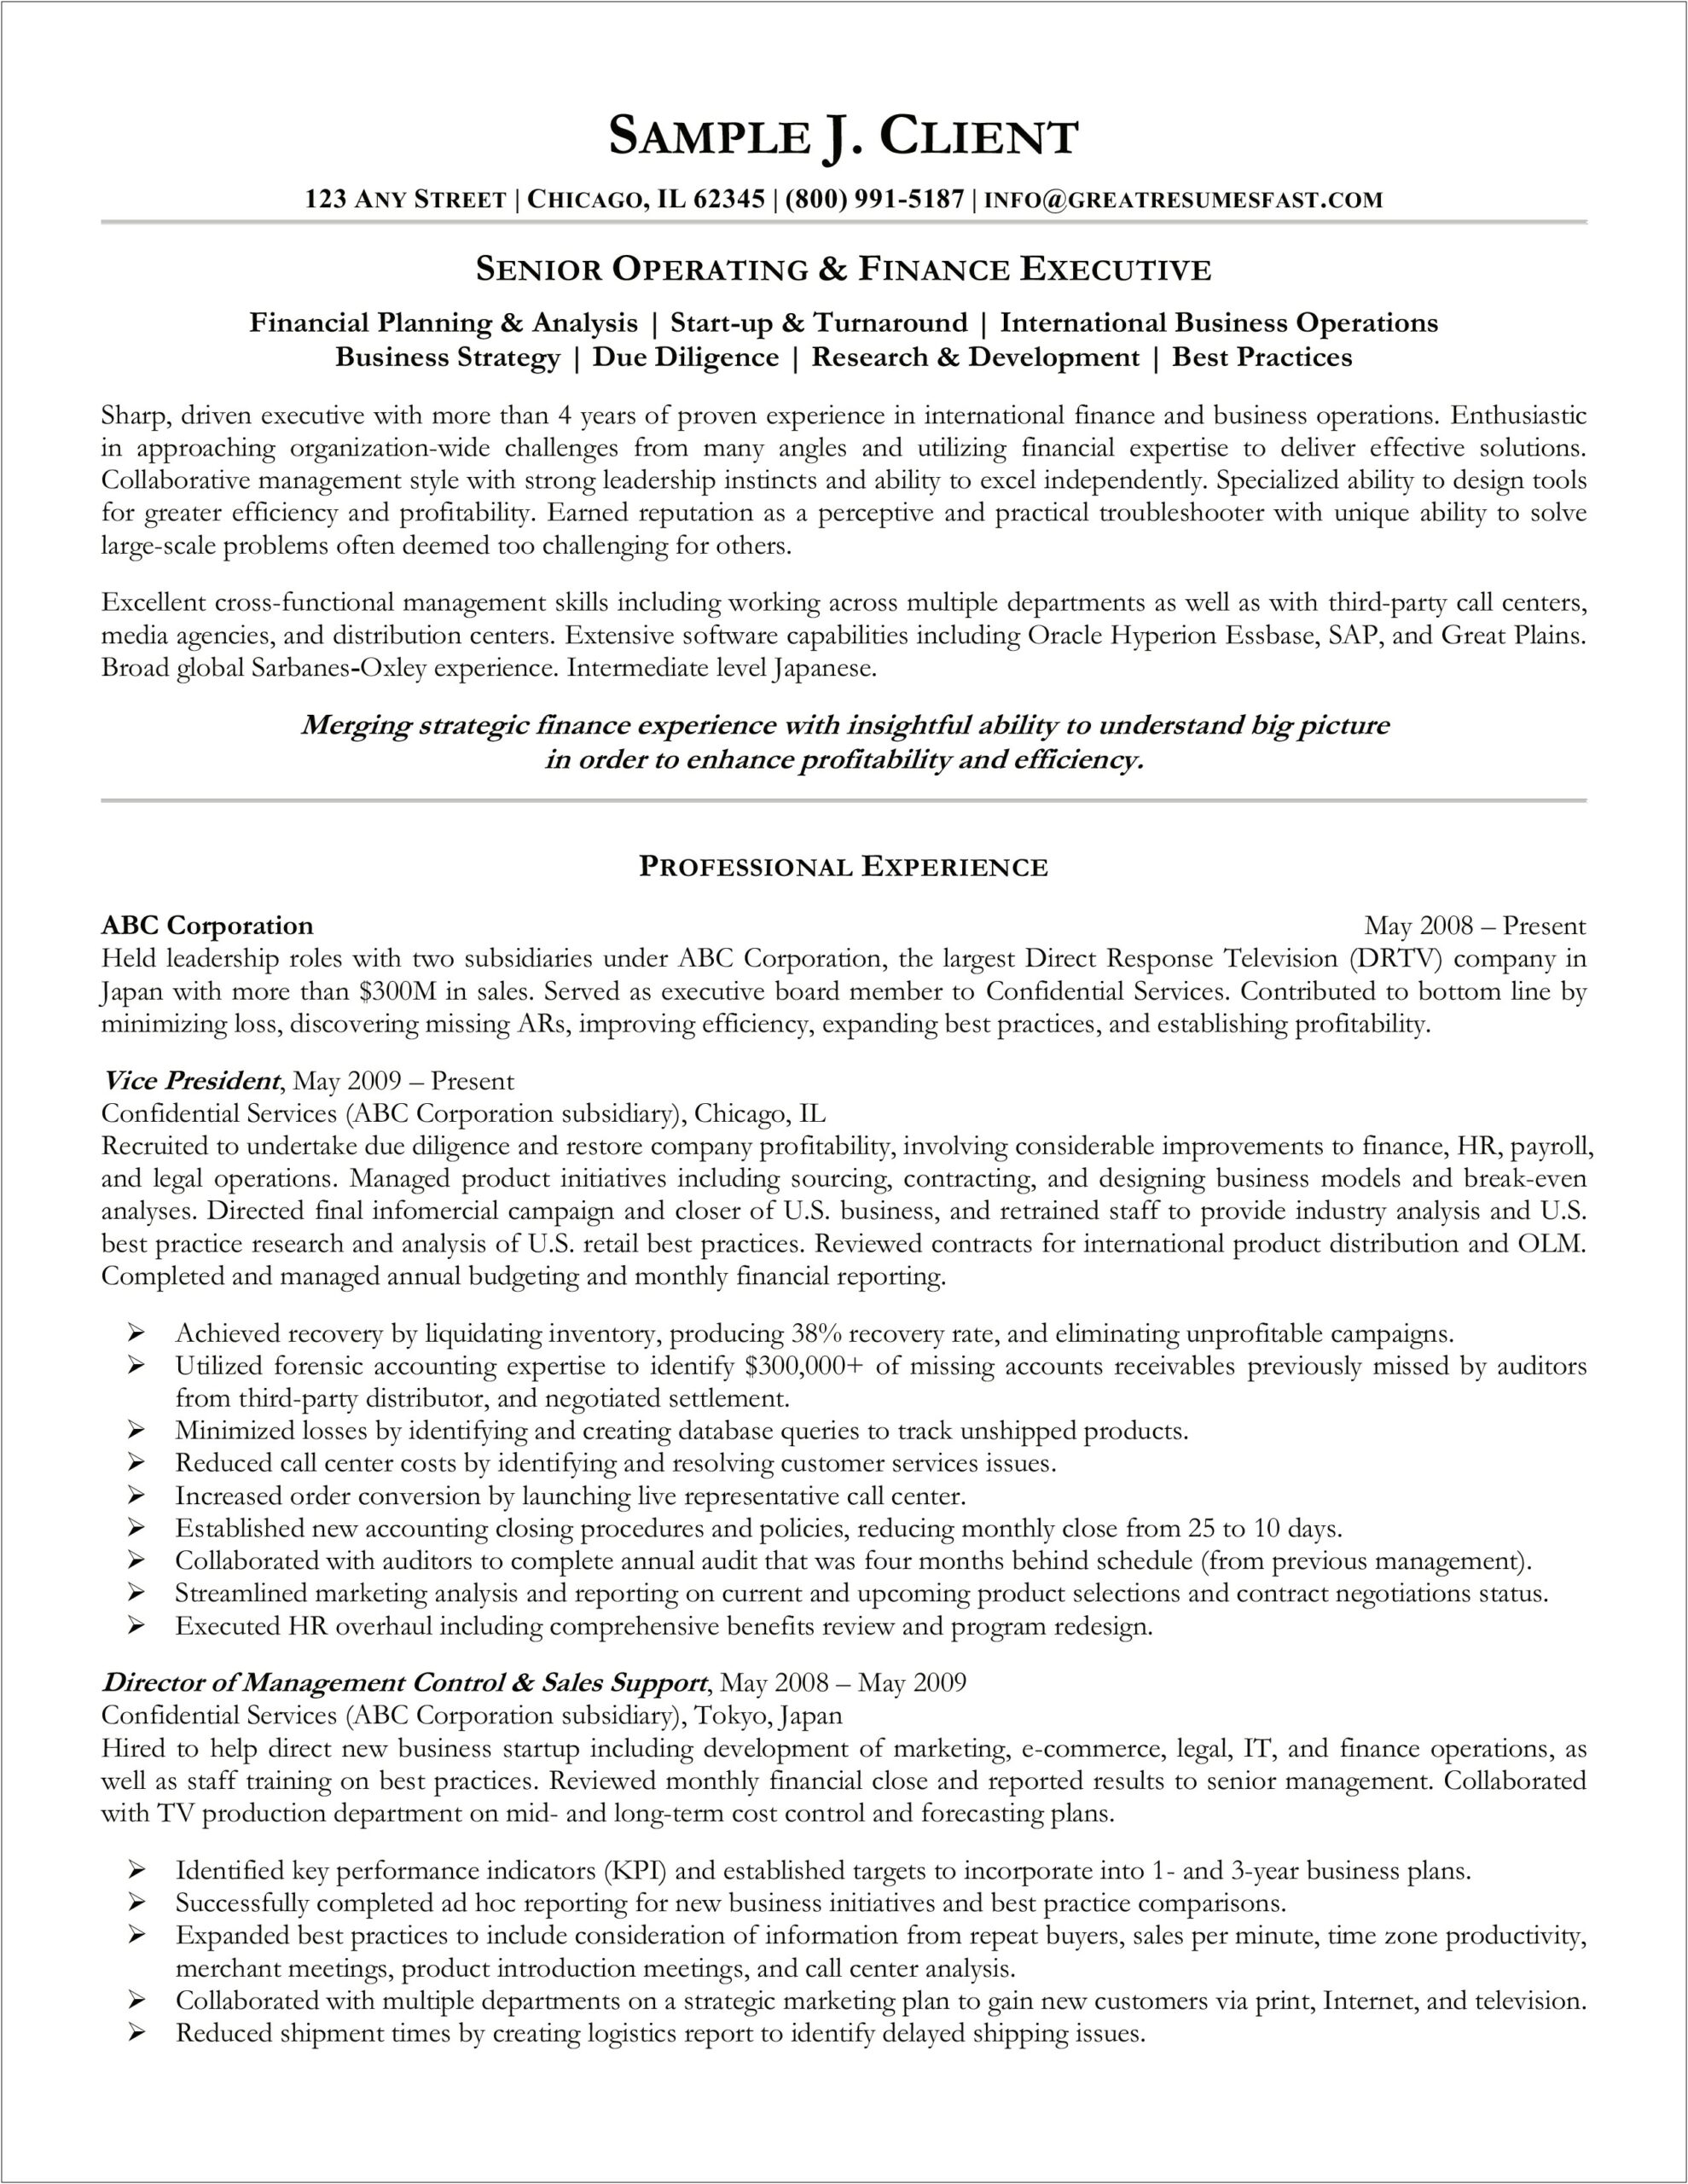 Executive Leader Resume Profile Summary For Operations